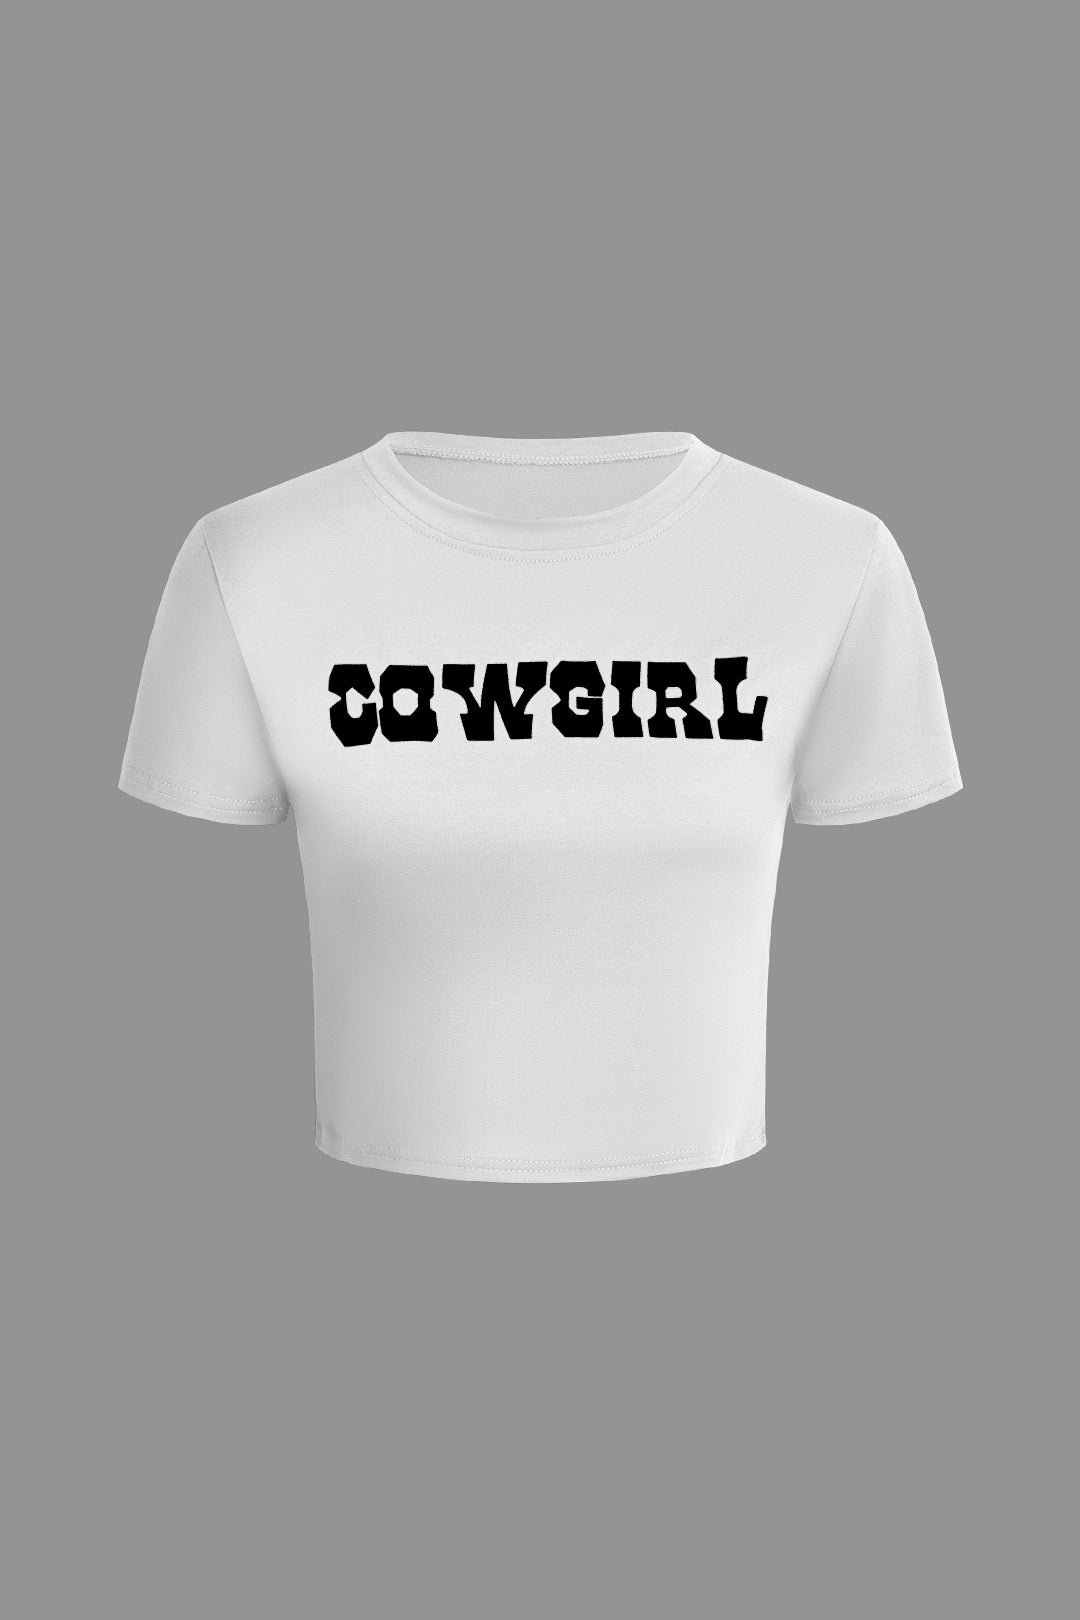 COWGIRL Letter Print T-shirt